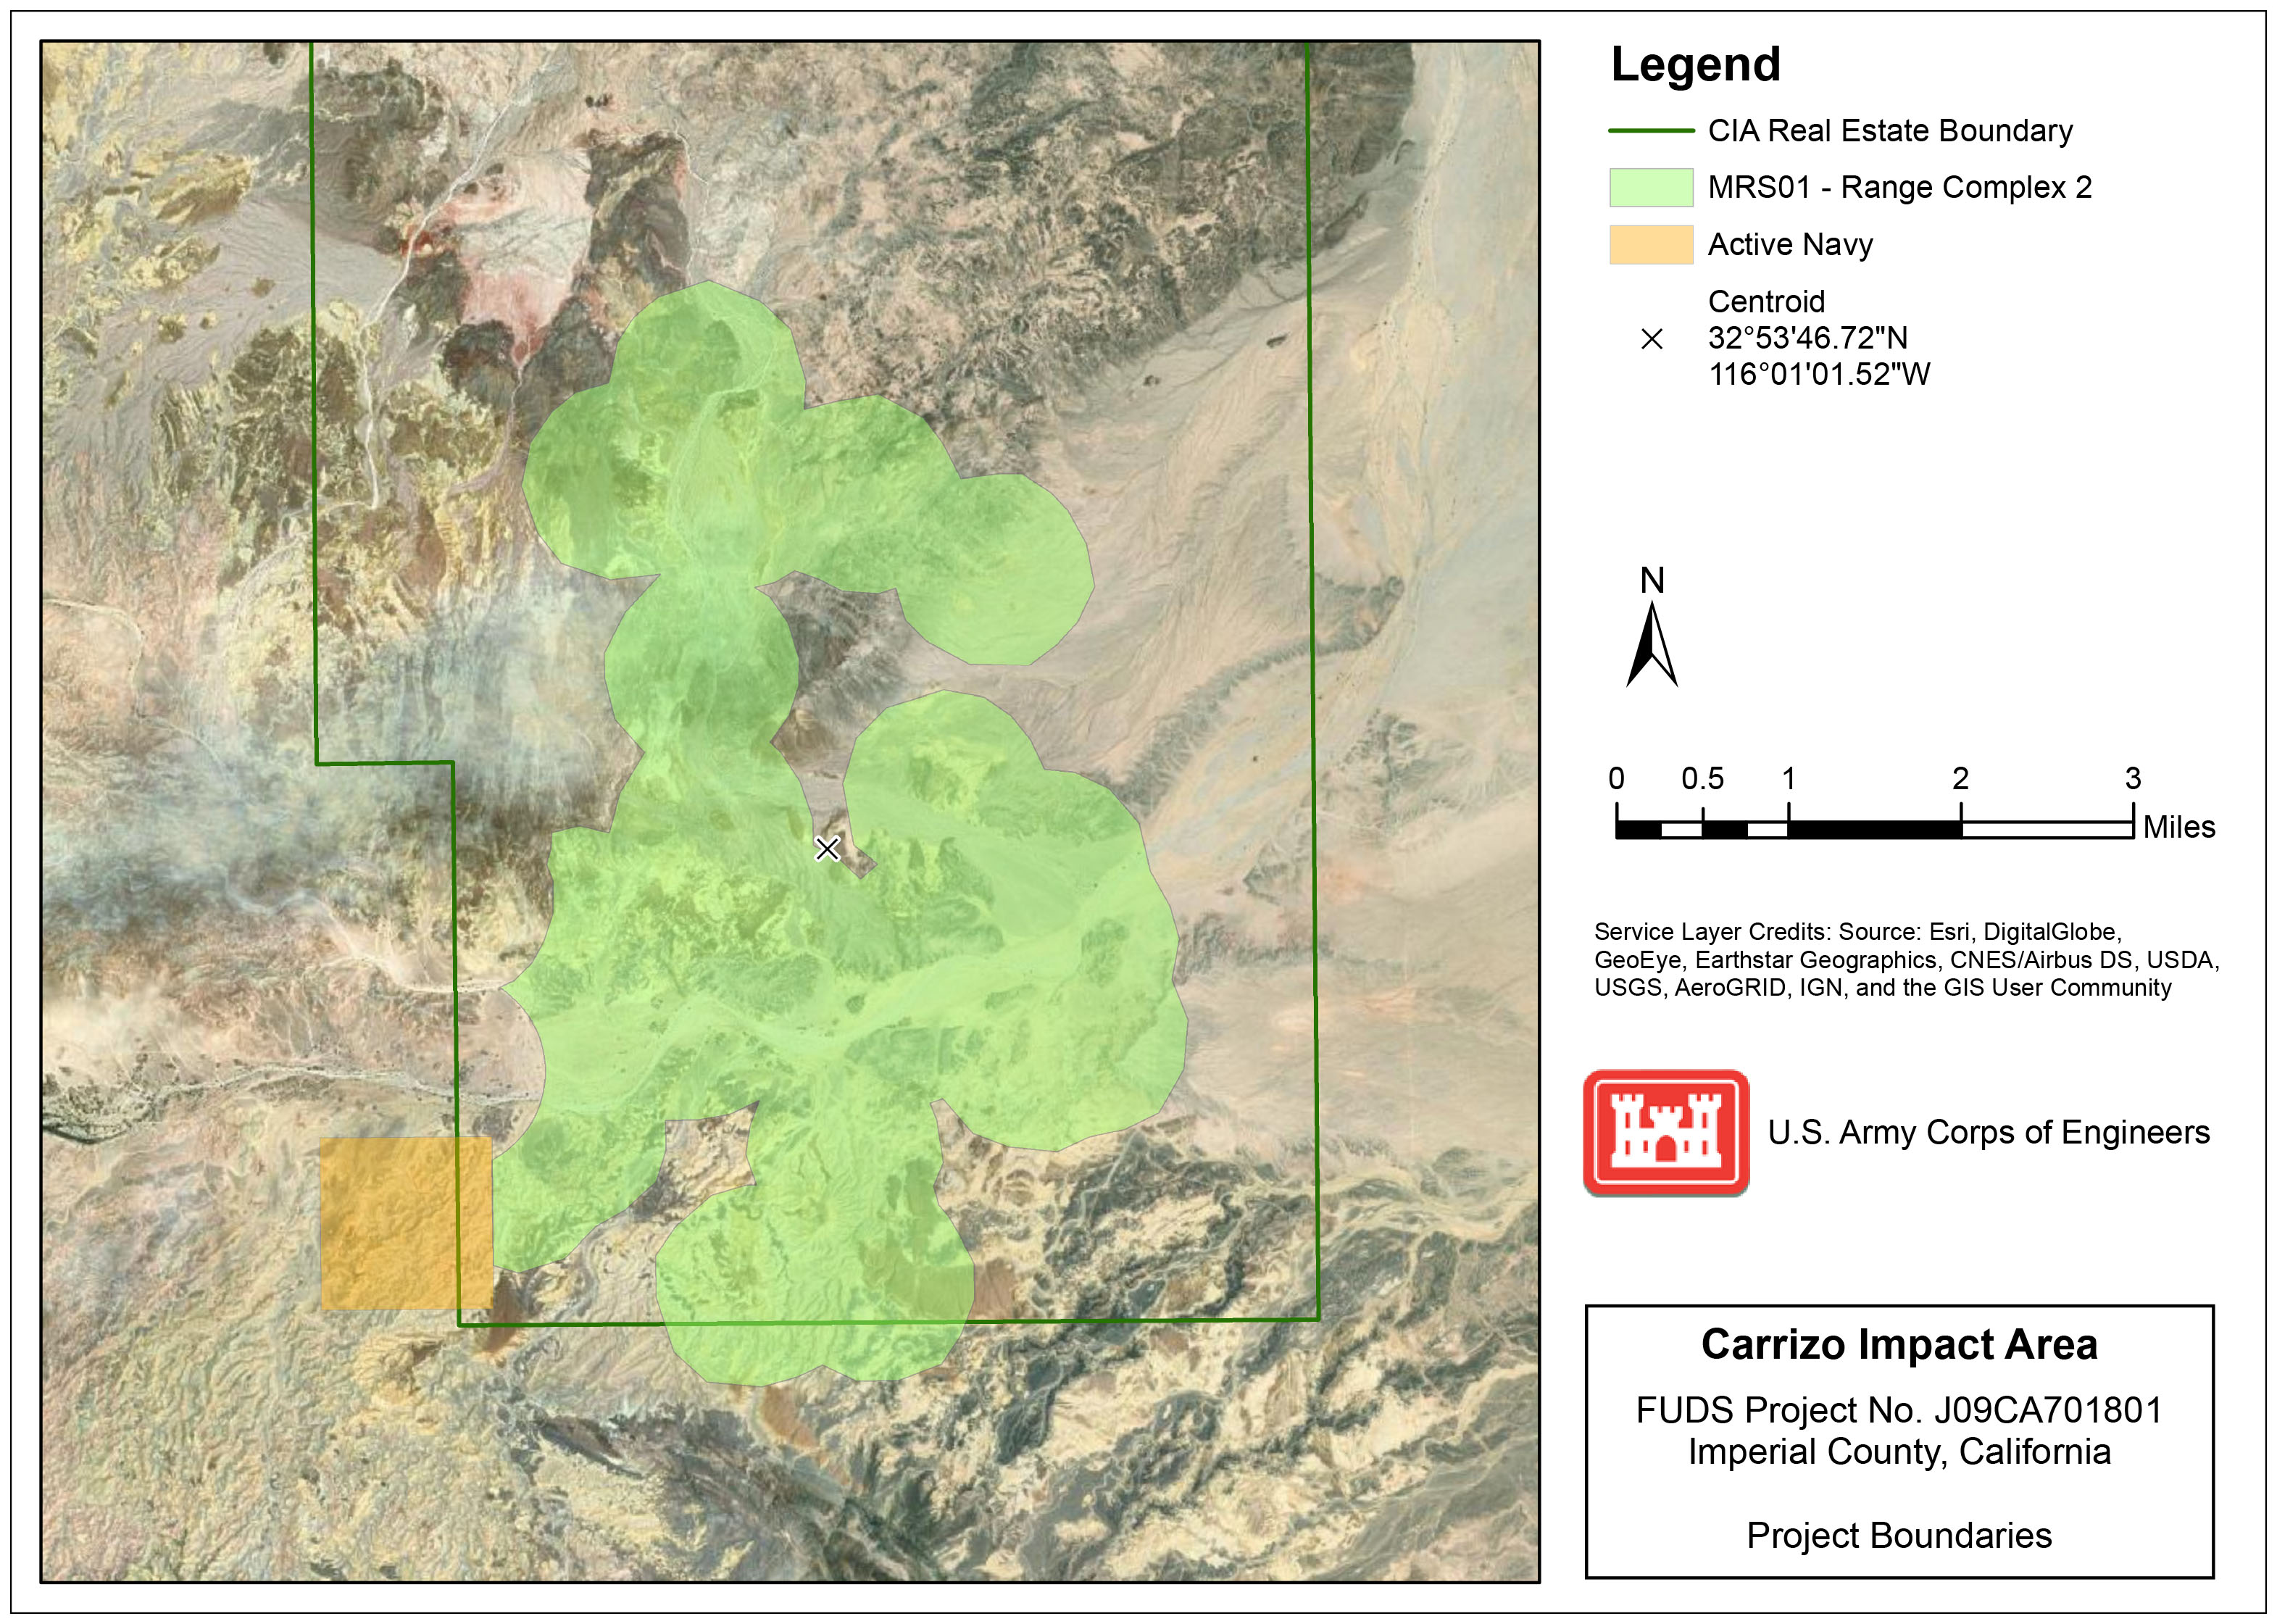 Site Layout for Carizzo Impact Area project in Imperial County, CA